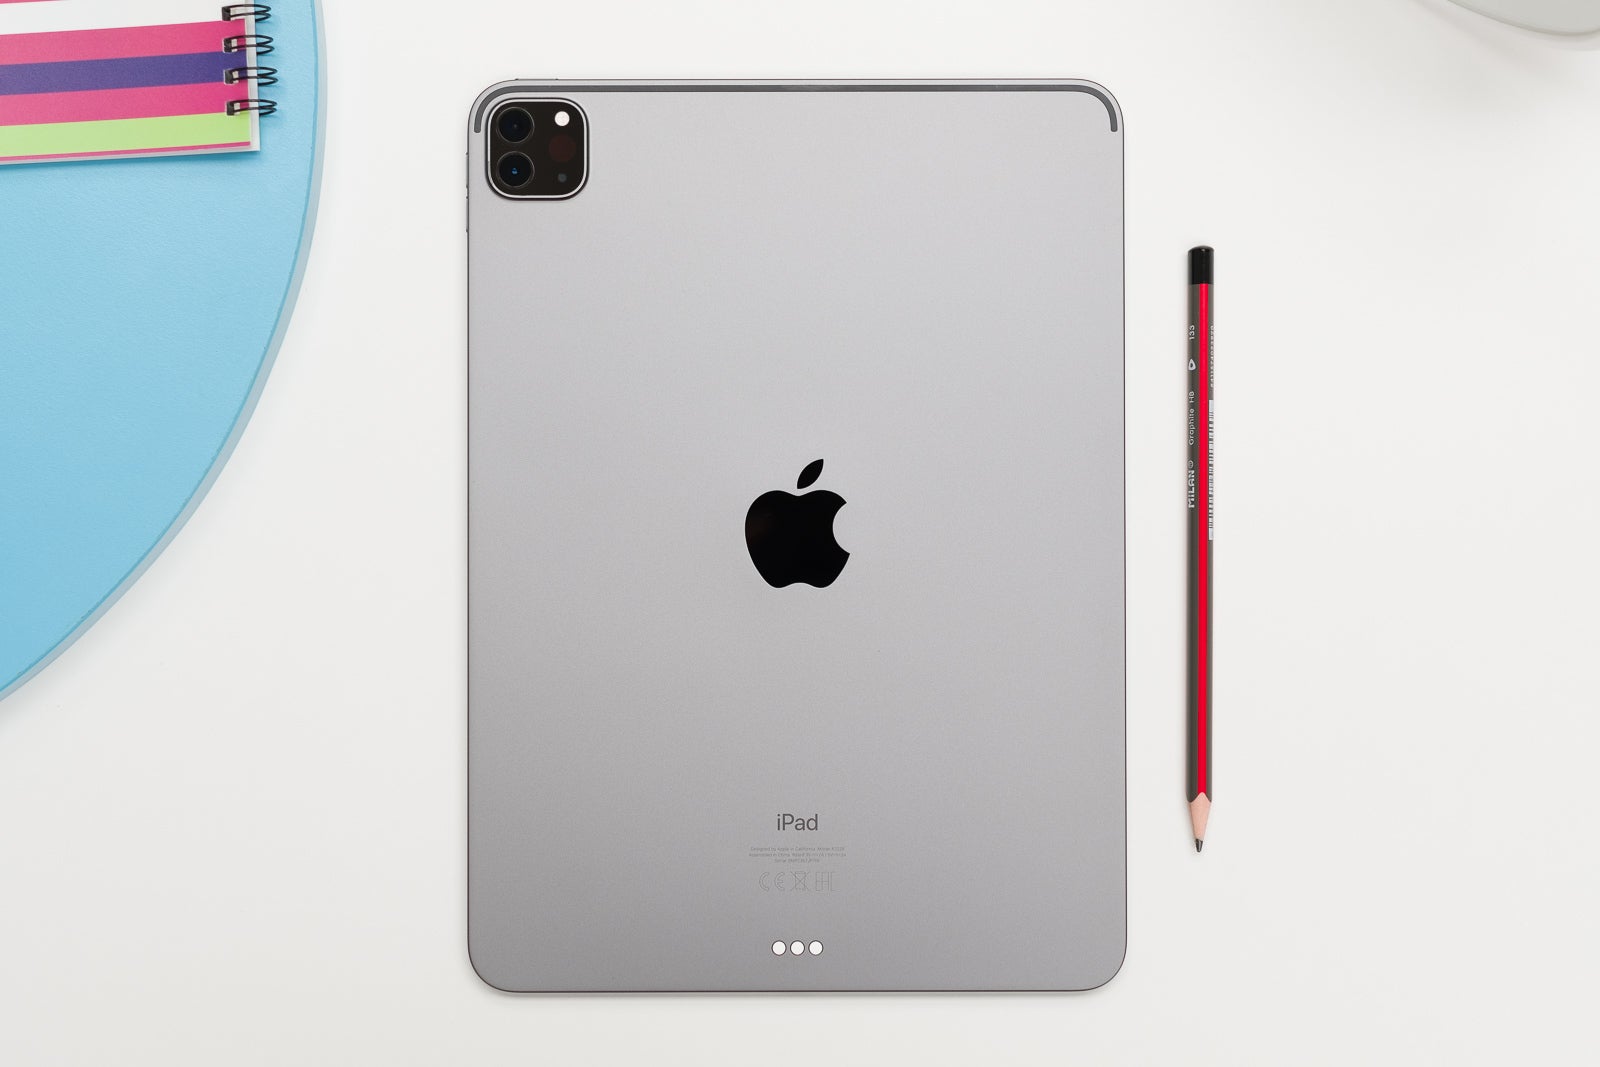 The Mini-LED iPad Pro 5G has been delayed - 11-inch iPad Air might skip Mini-LED display tech after all